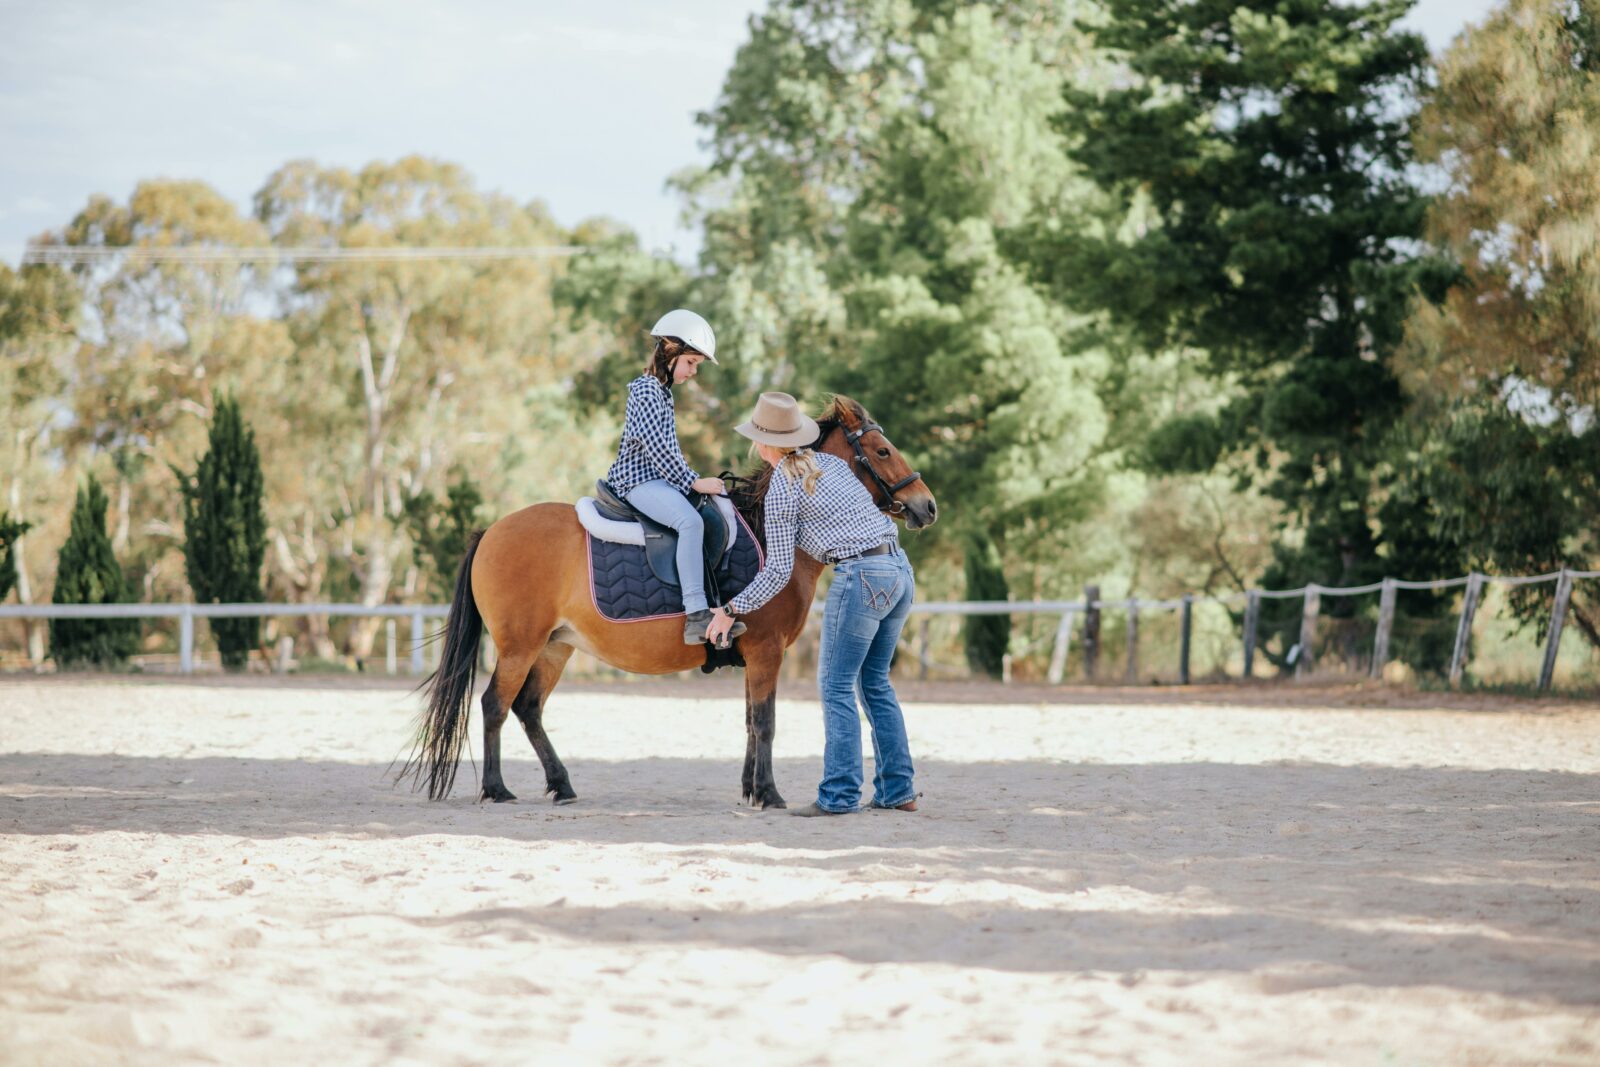 A child and educator undertaking an arena lesson